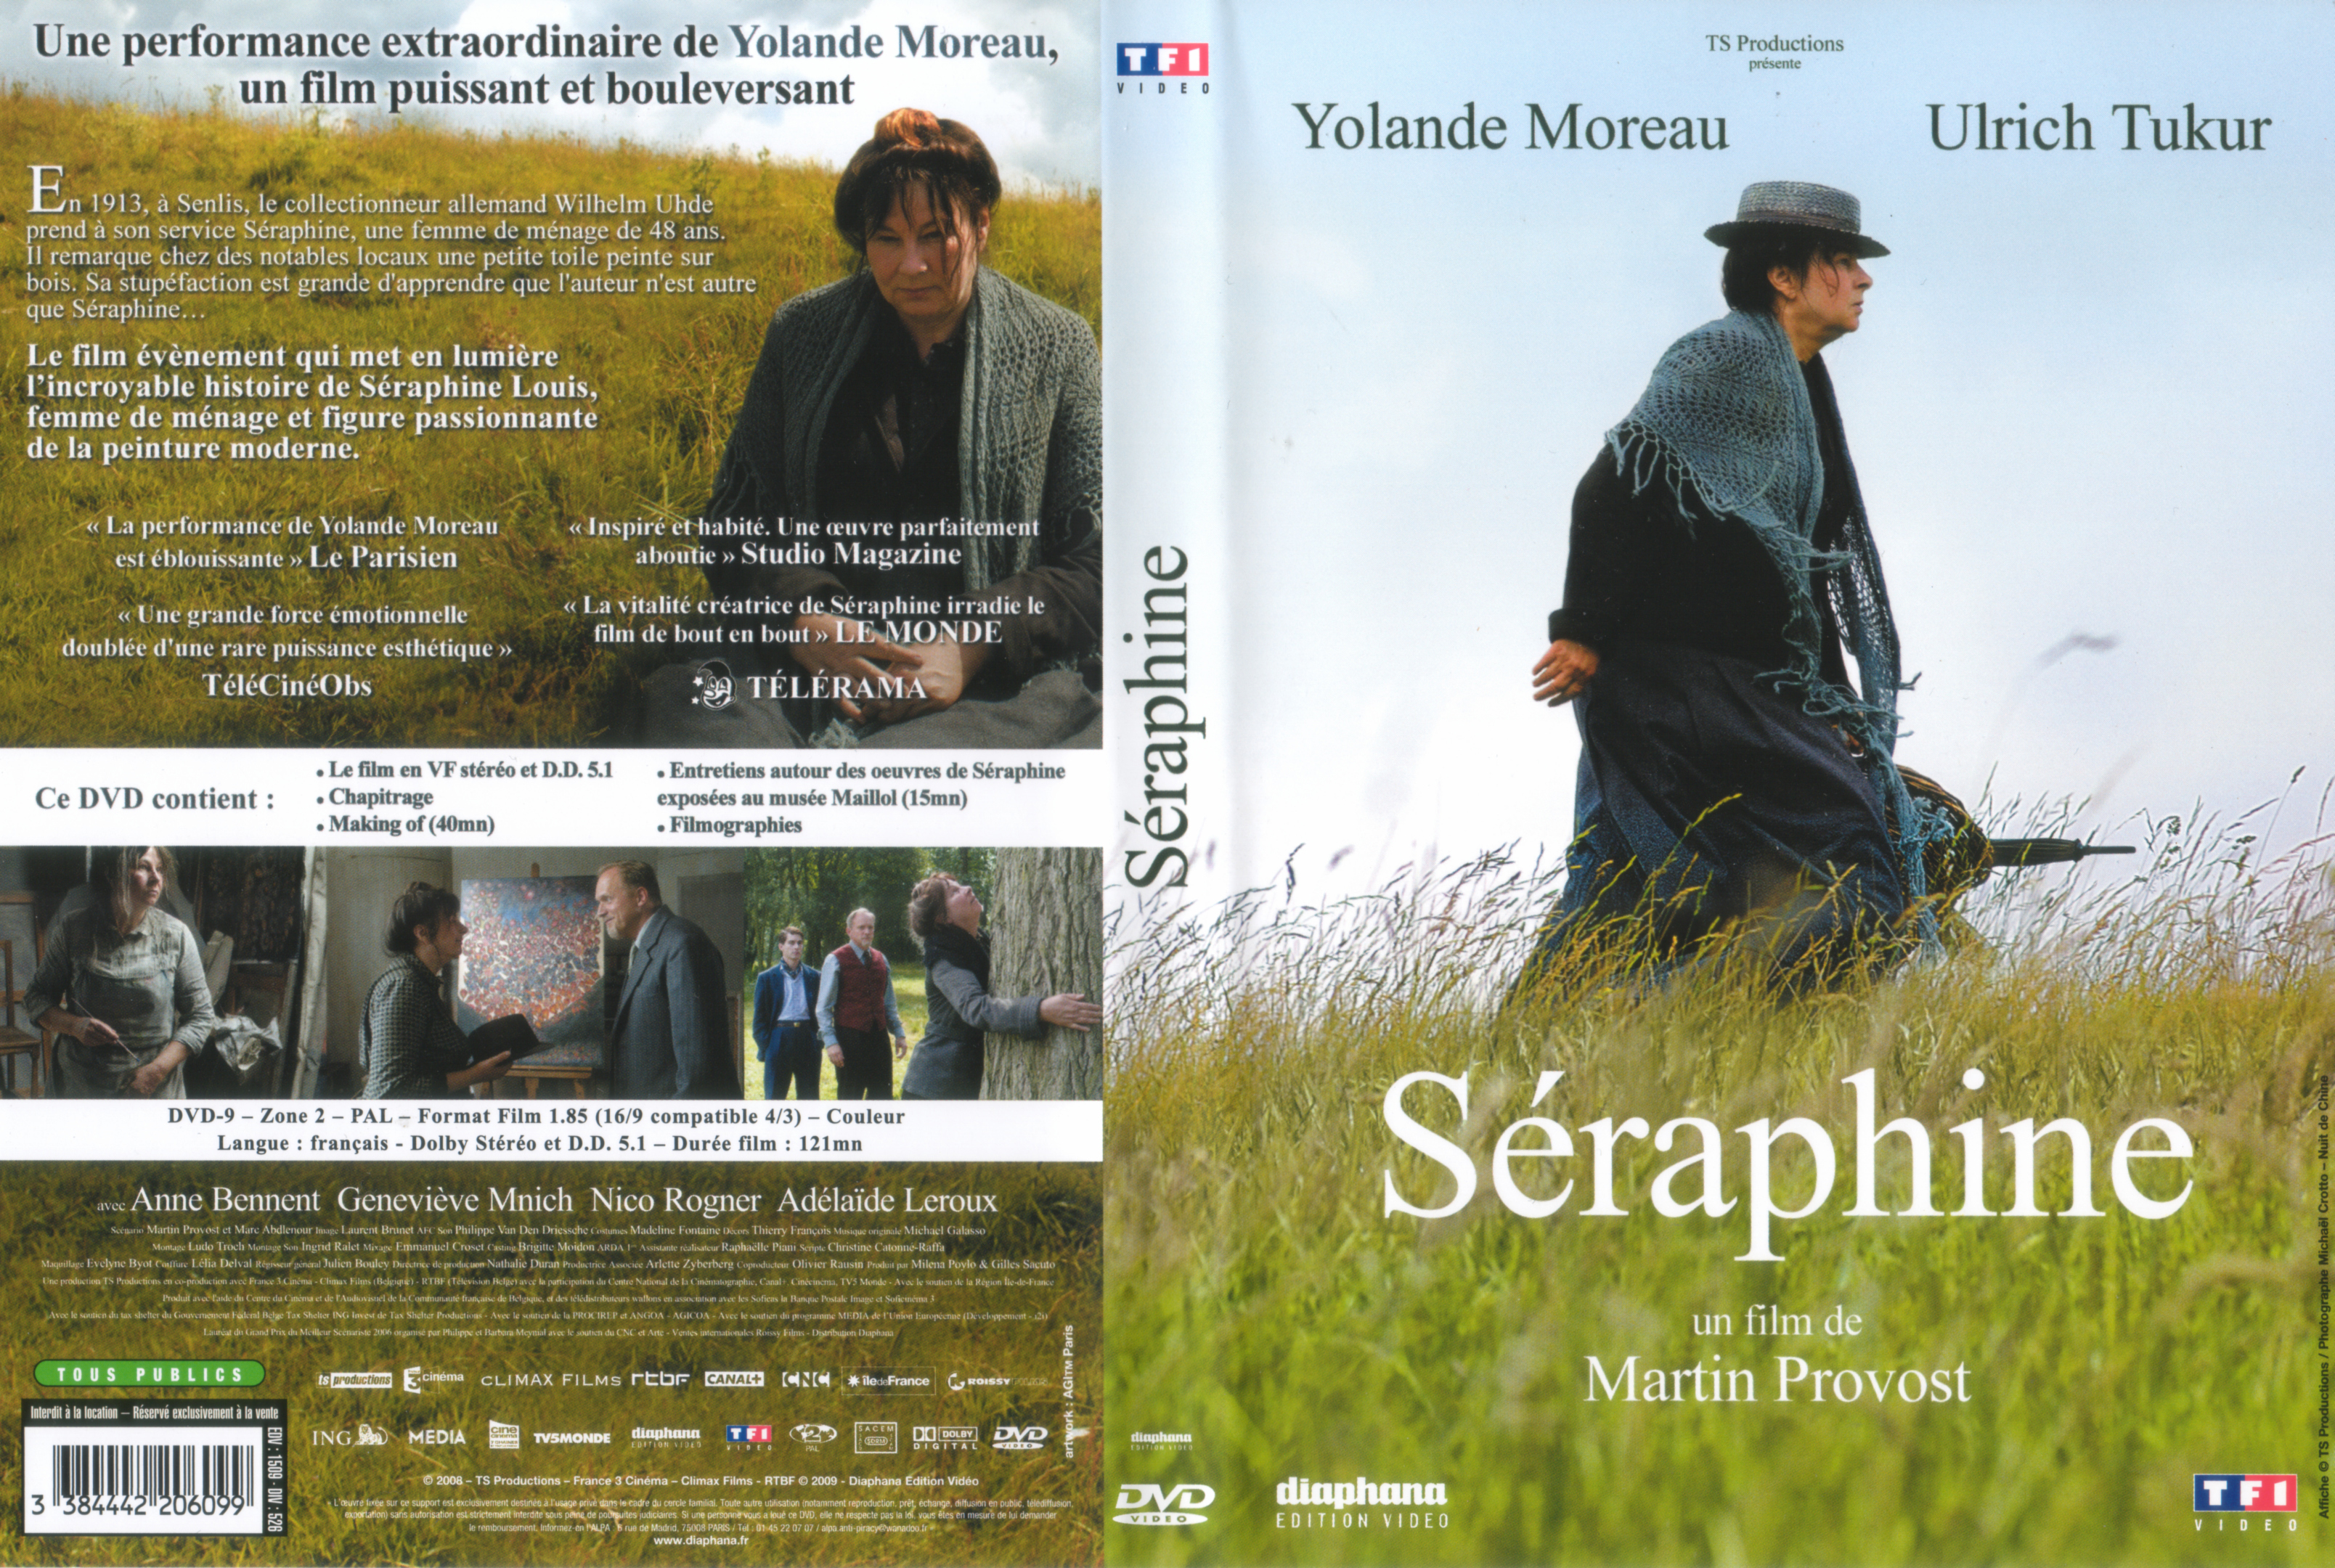 Jaquette DVD Sraphine